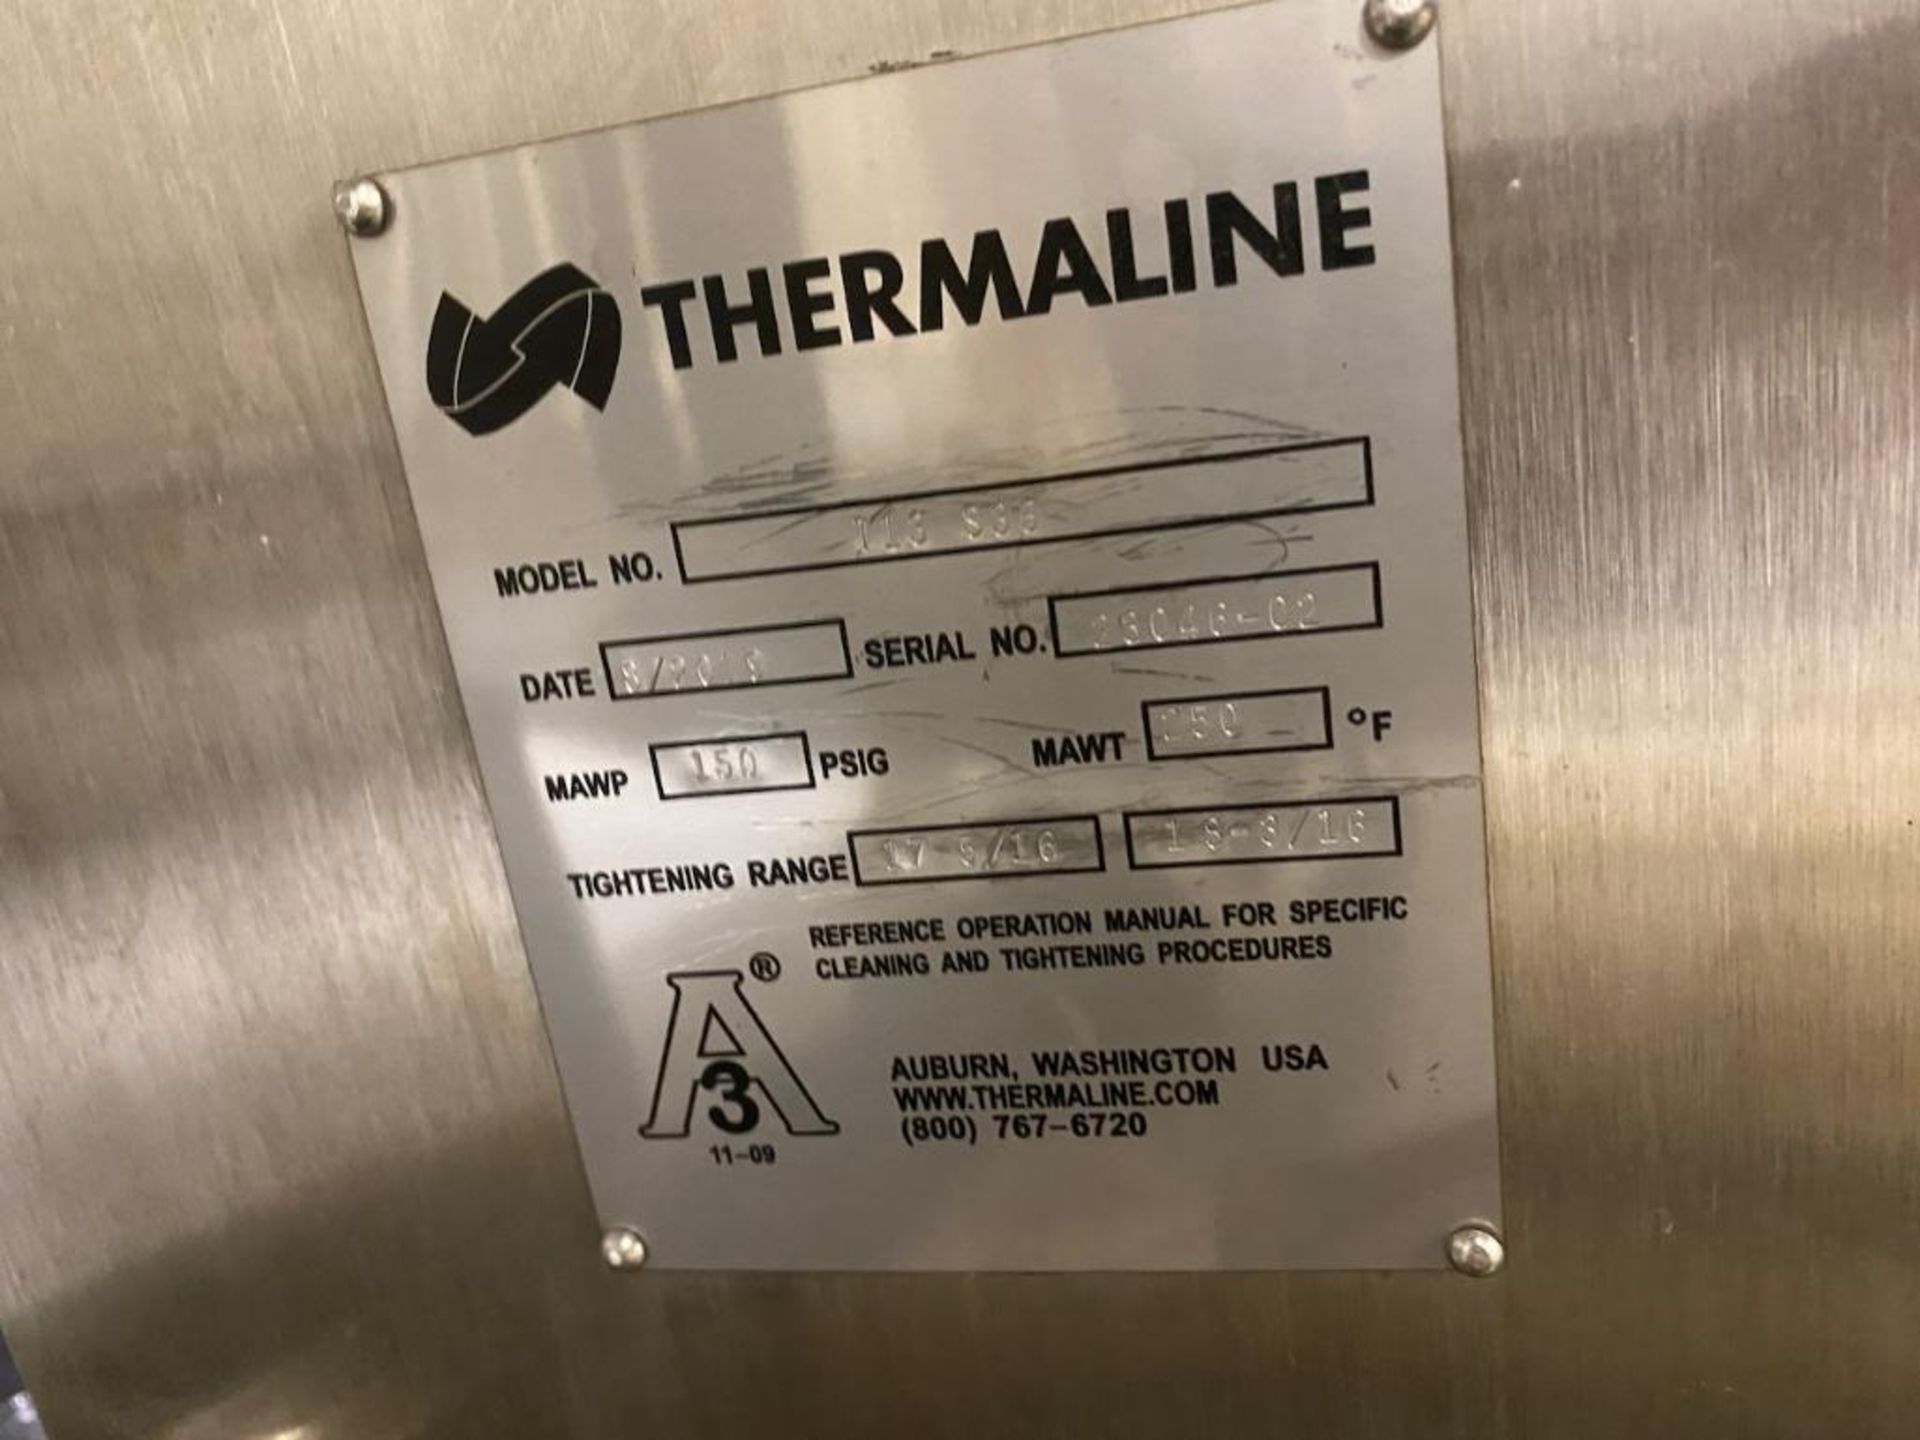 2019 Thermaline Stainless Steel, Plate Heat Exchanger. Model 113 S36. Rated For 150 PSI At 250 Degre - Image 2 of 2